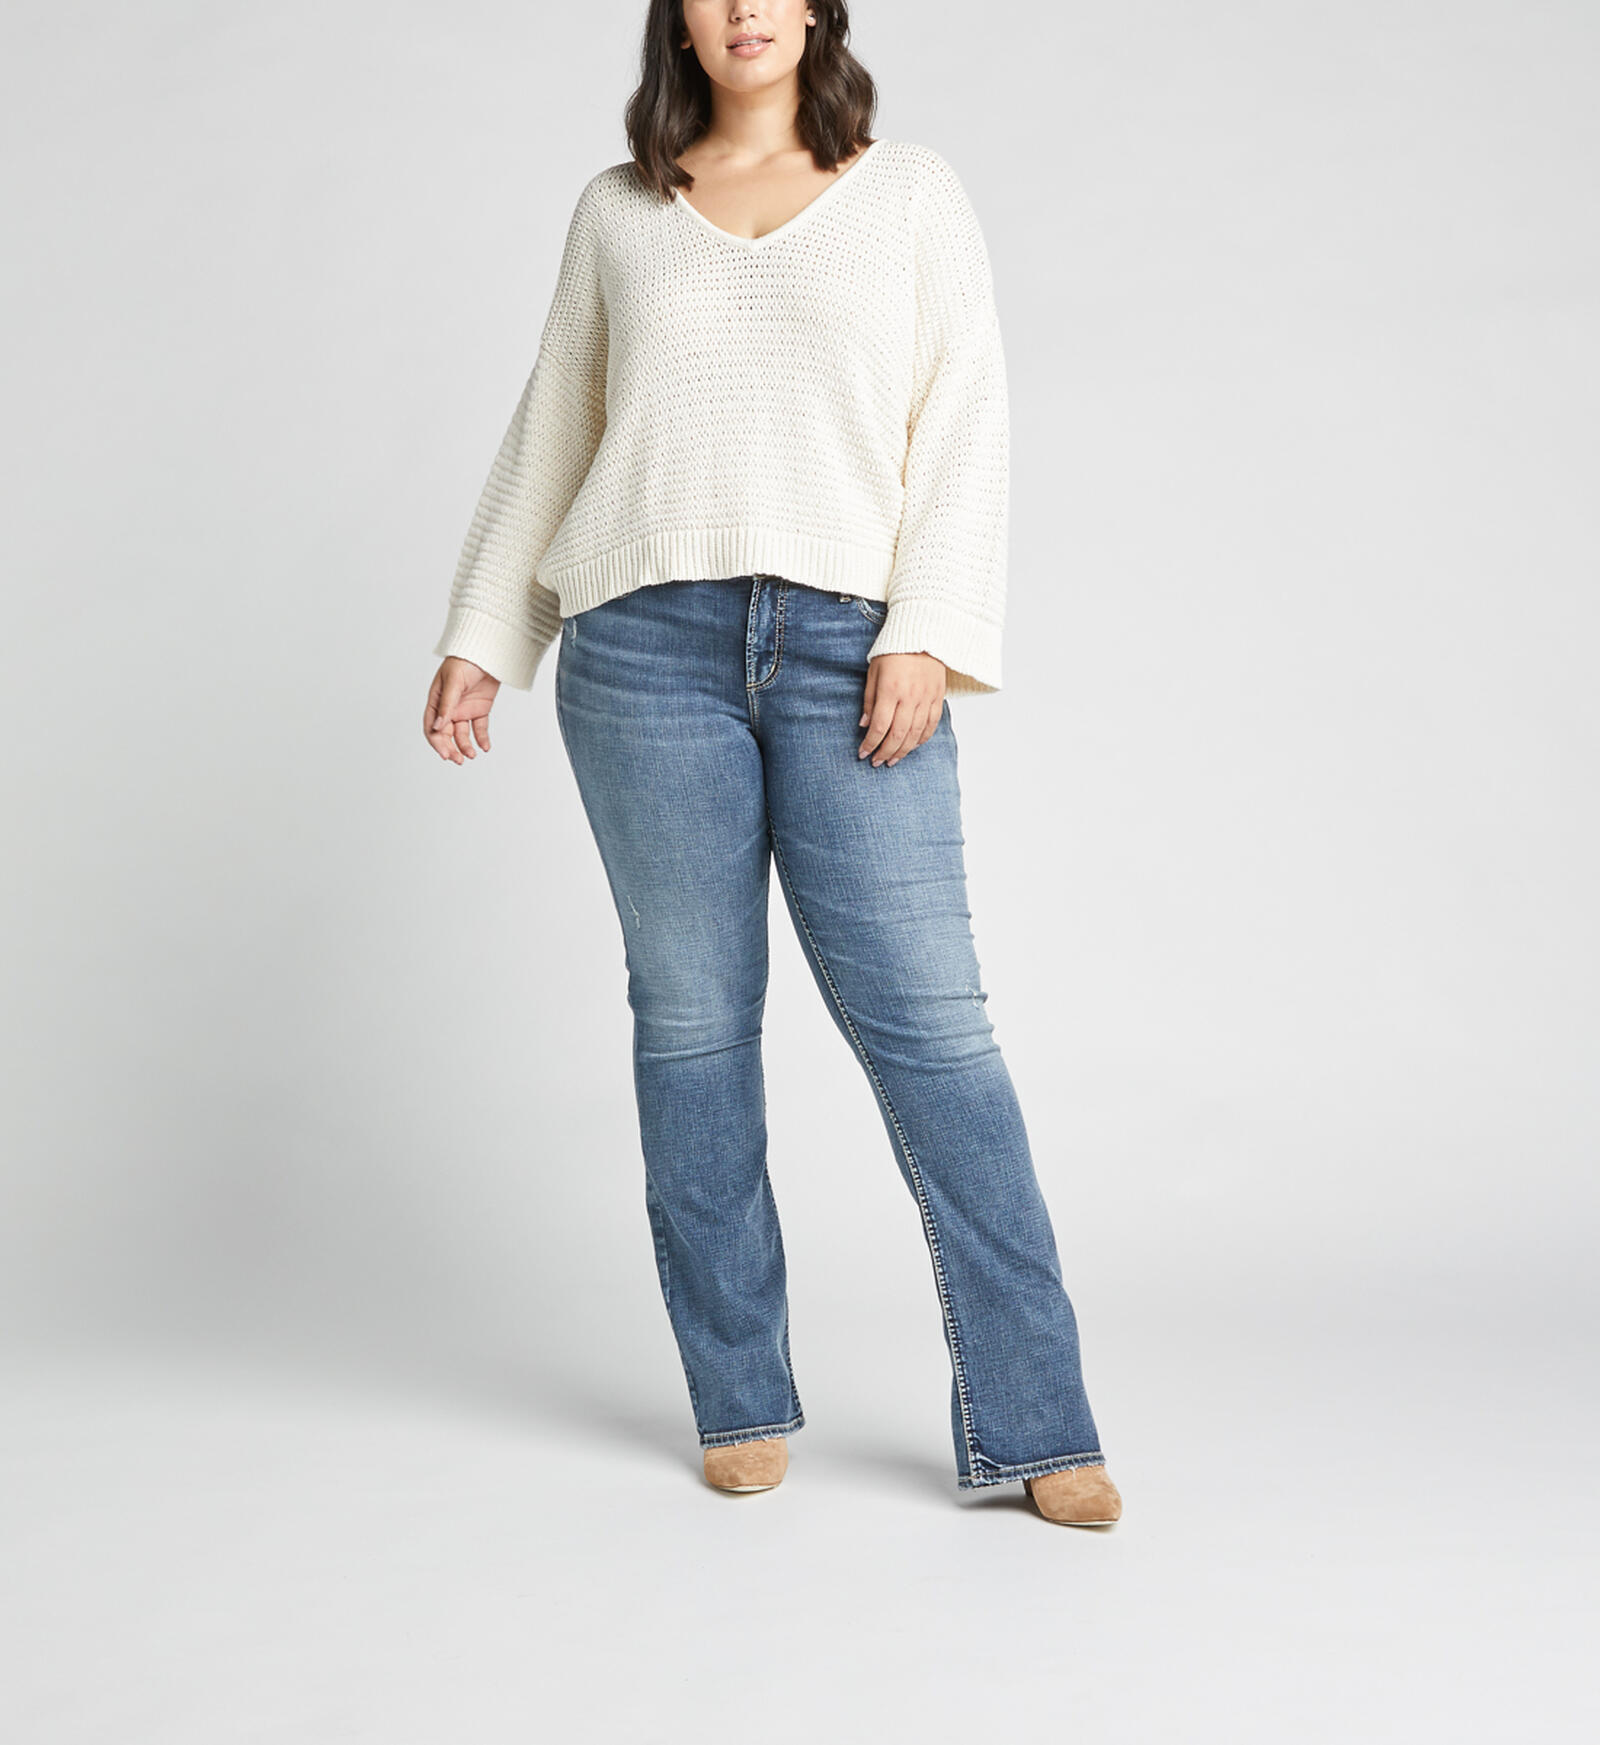 Plus Size Sonoma Goods For Life® Elastic-Waist Curvy Mid-Rise Bootcut Jeans